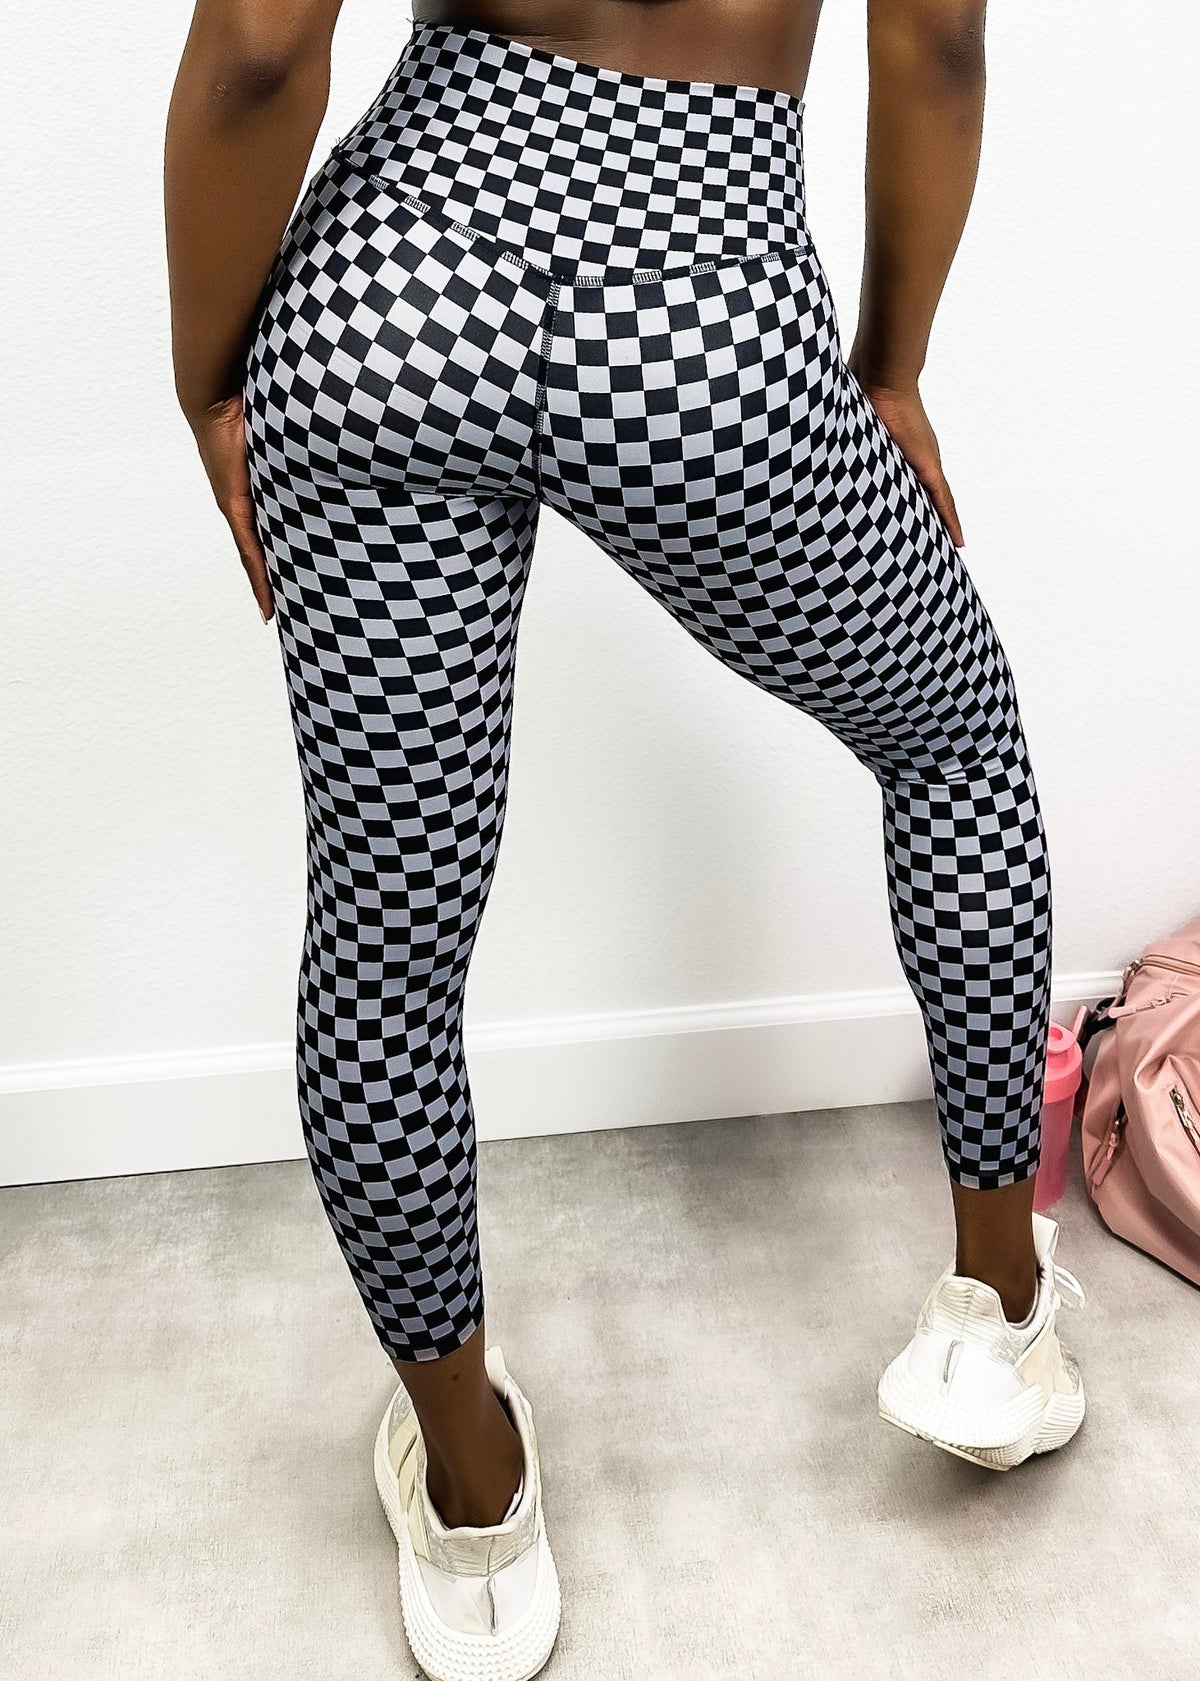 Showing the back of Checkered High Rise 7/8 Leggings-black